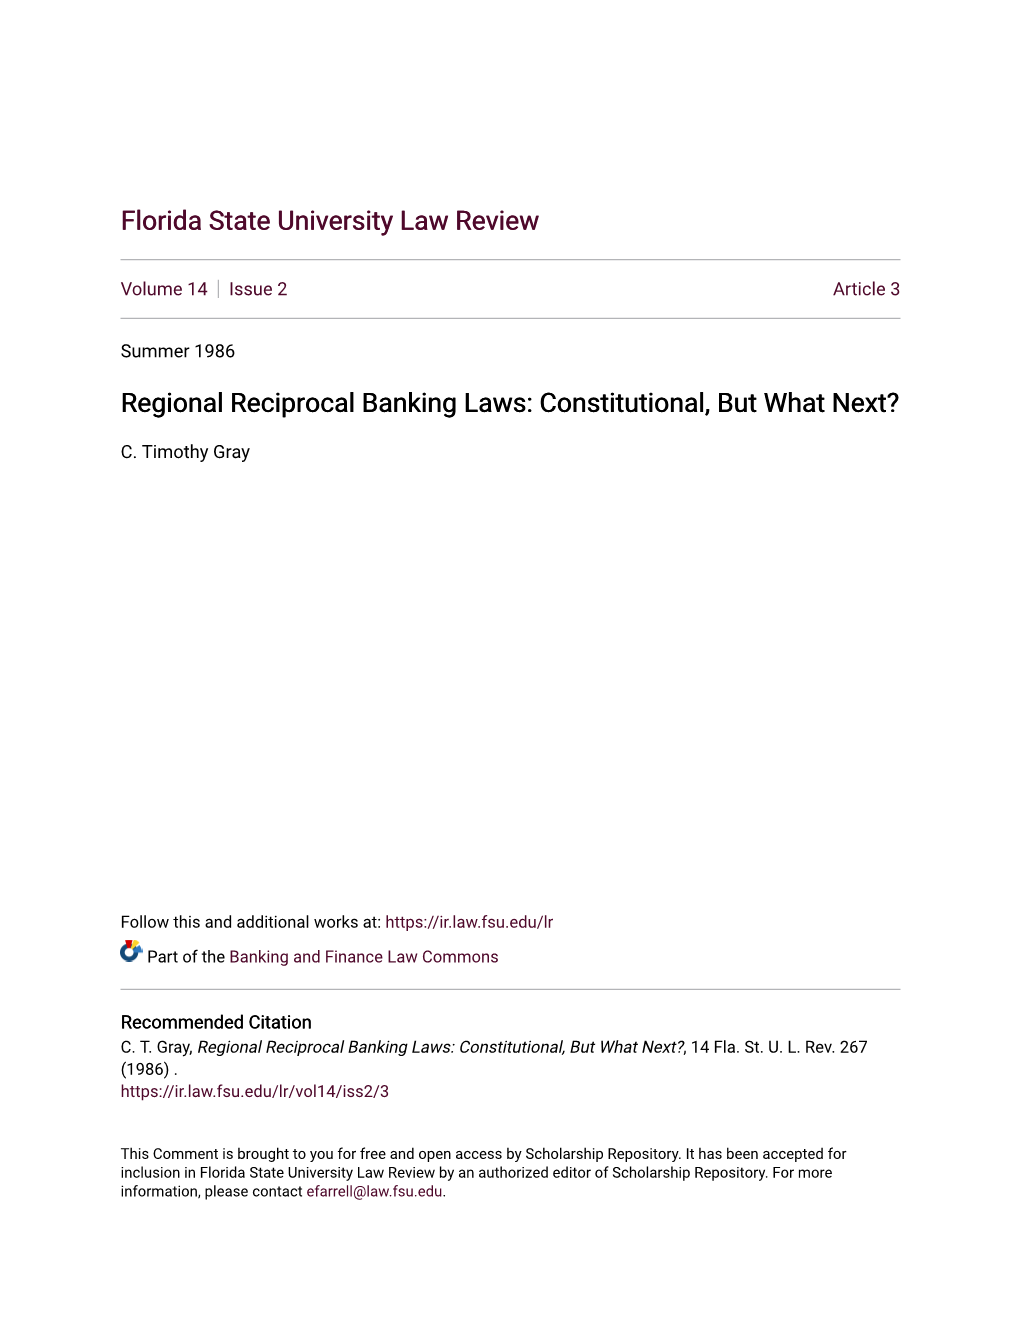 Regional Reciprocal Banking Laws: Constitutional, but What Next?